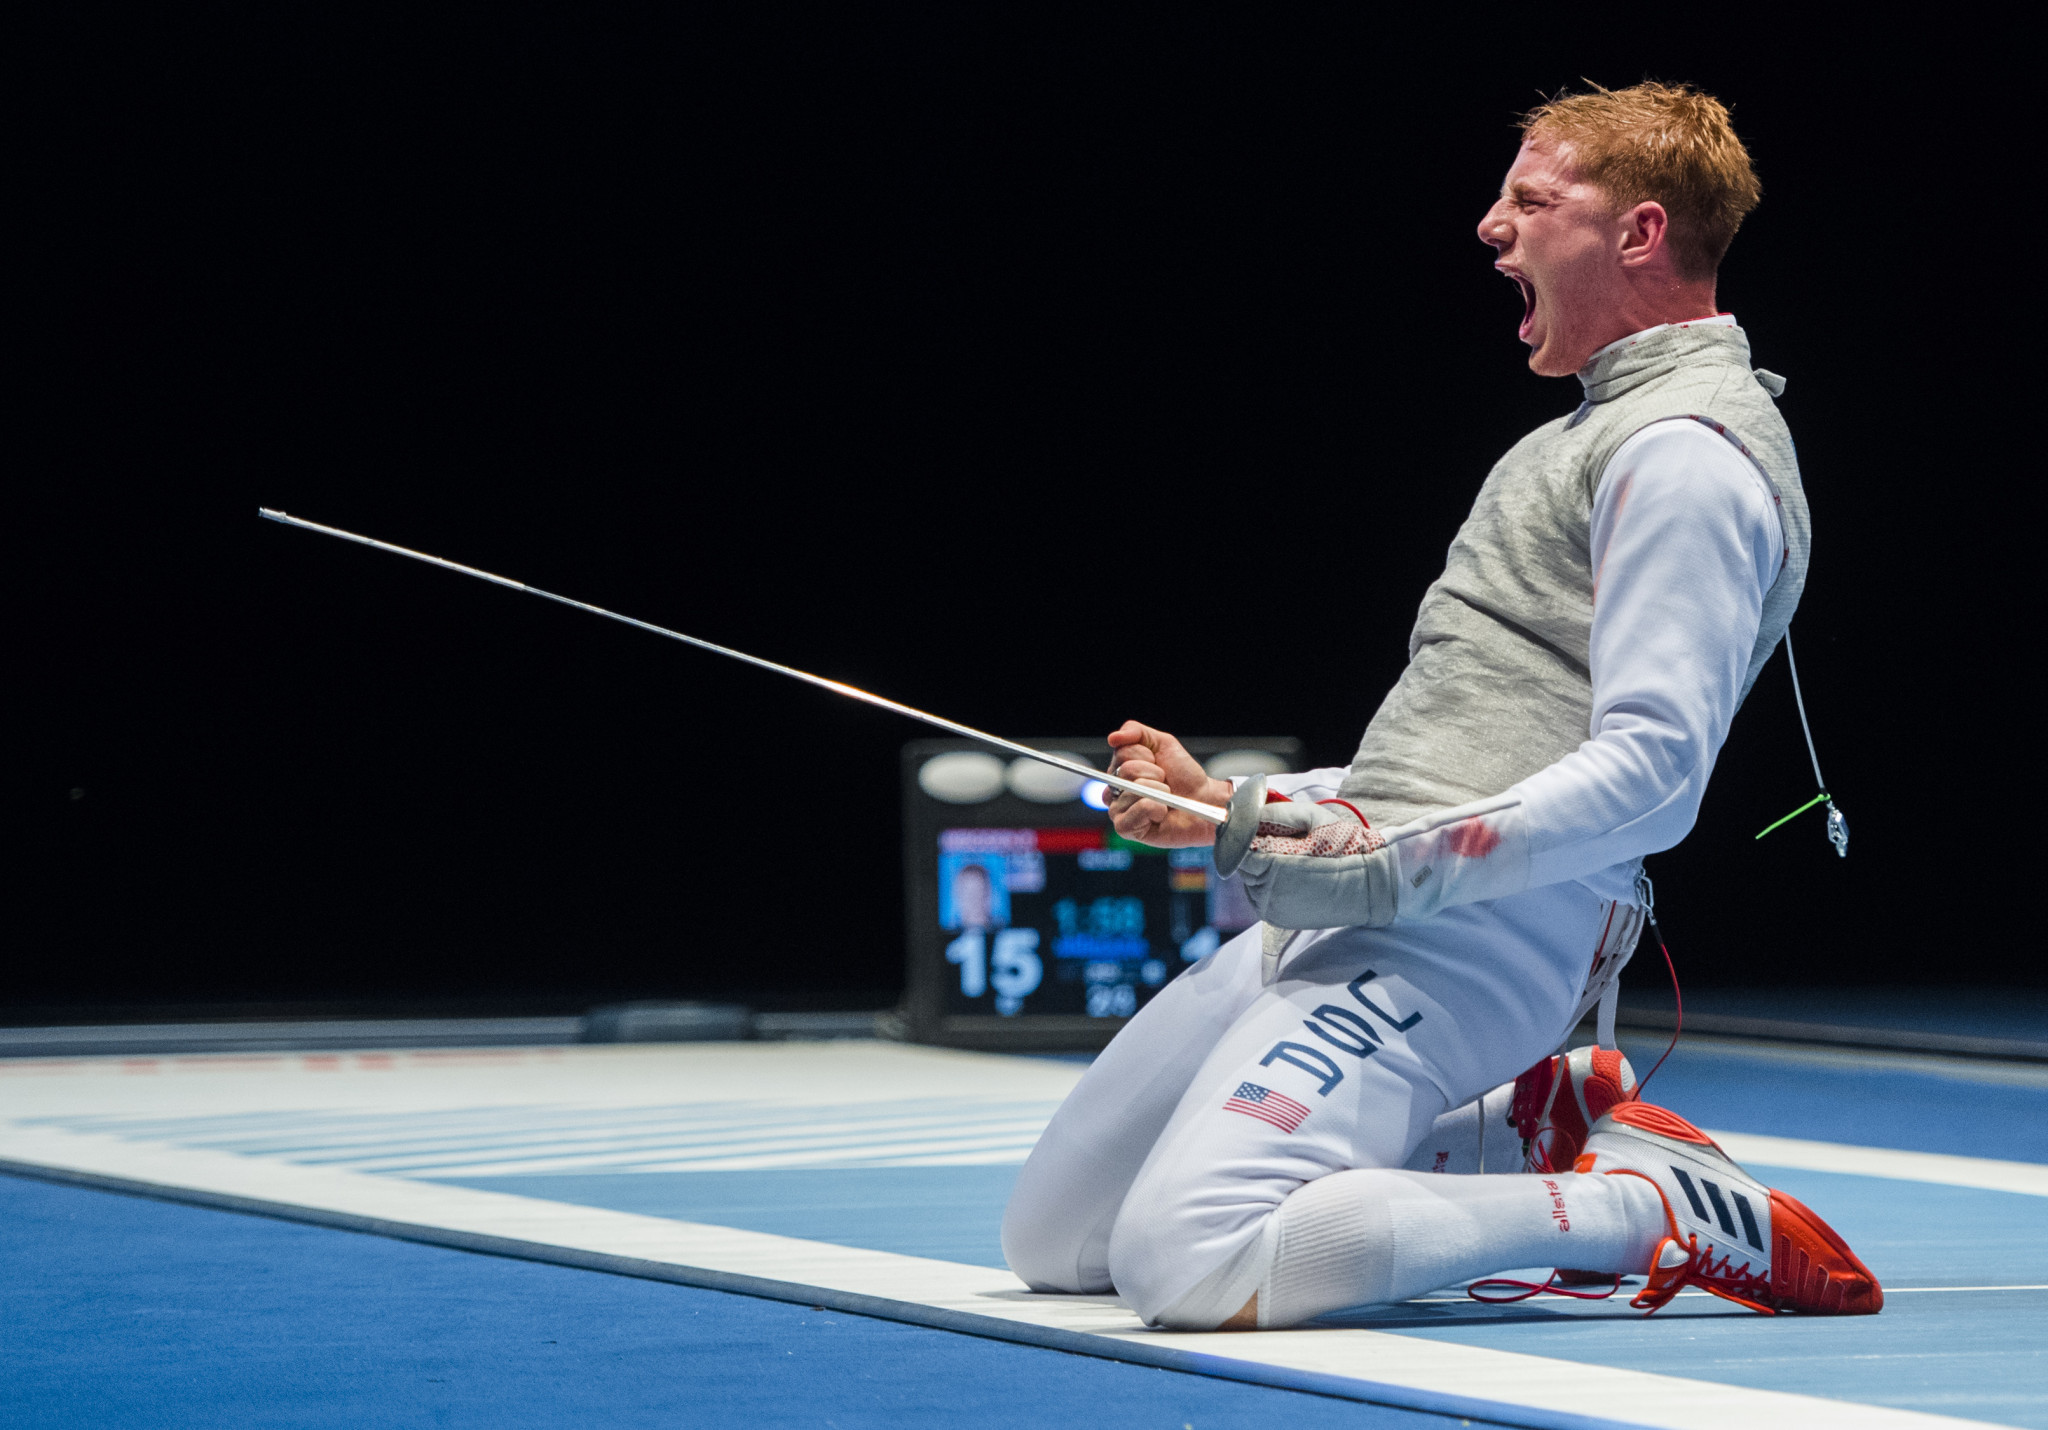 Race Imboden will be seeking a repeat win over his US team-mate ©Getty Images